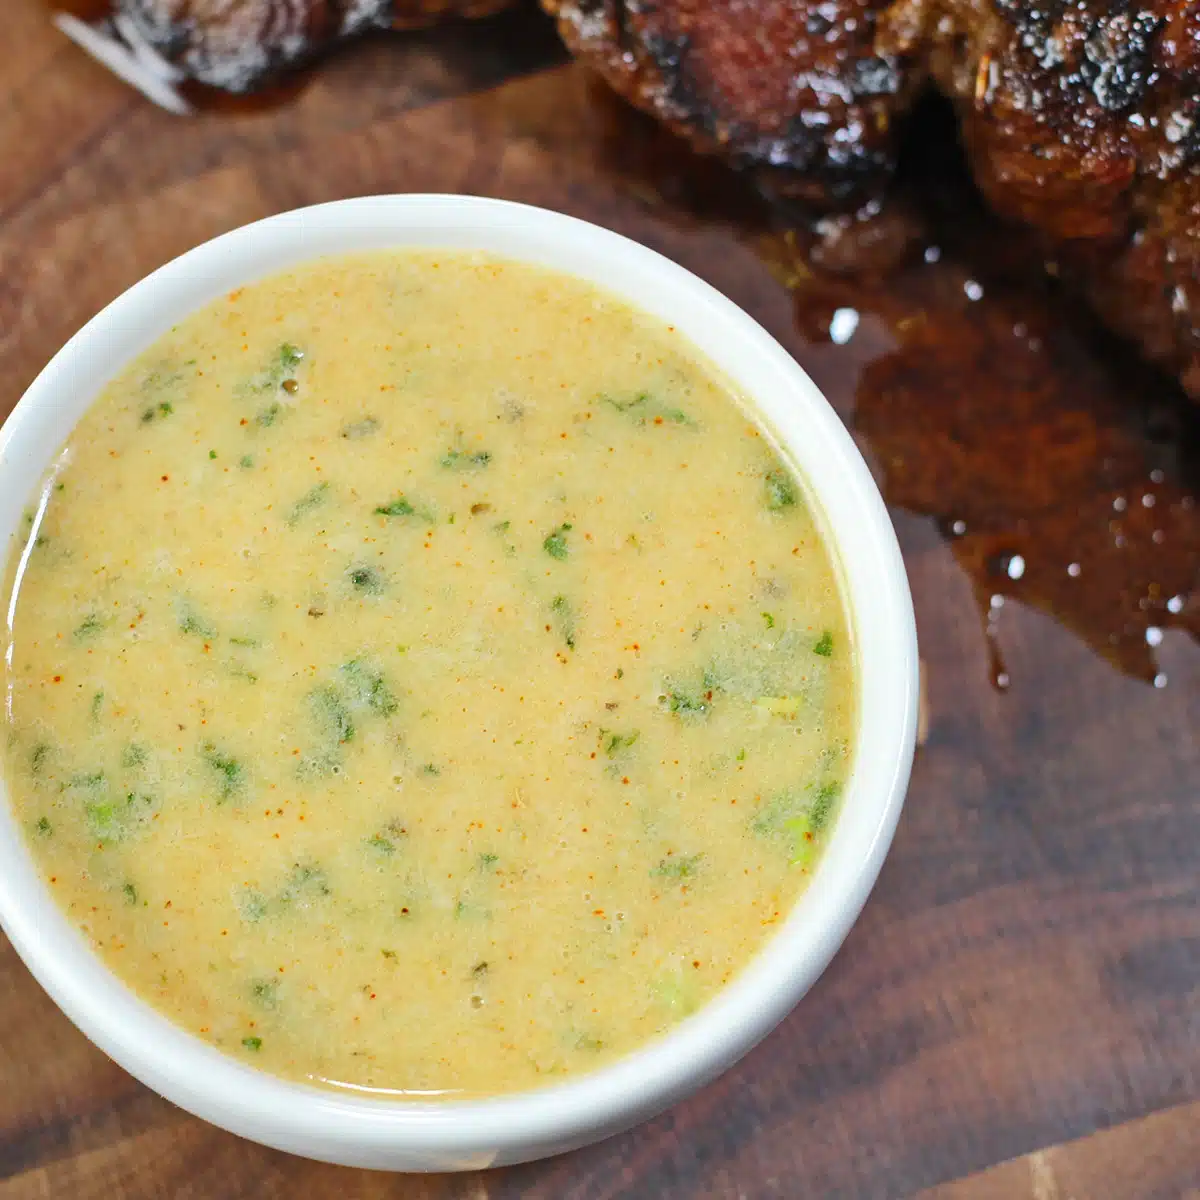 Best cowboy butter recipe with a white sauce bowl filled with the tasty butter dipping sauce and a panseared steak in background.